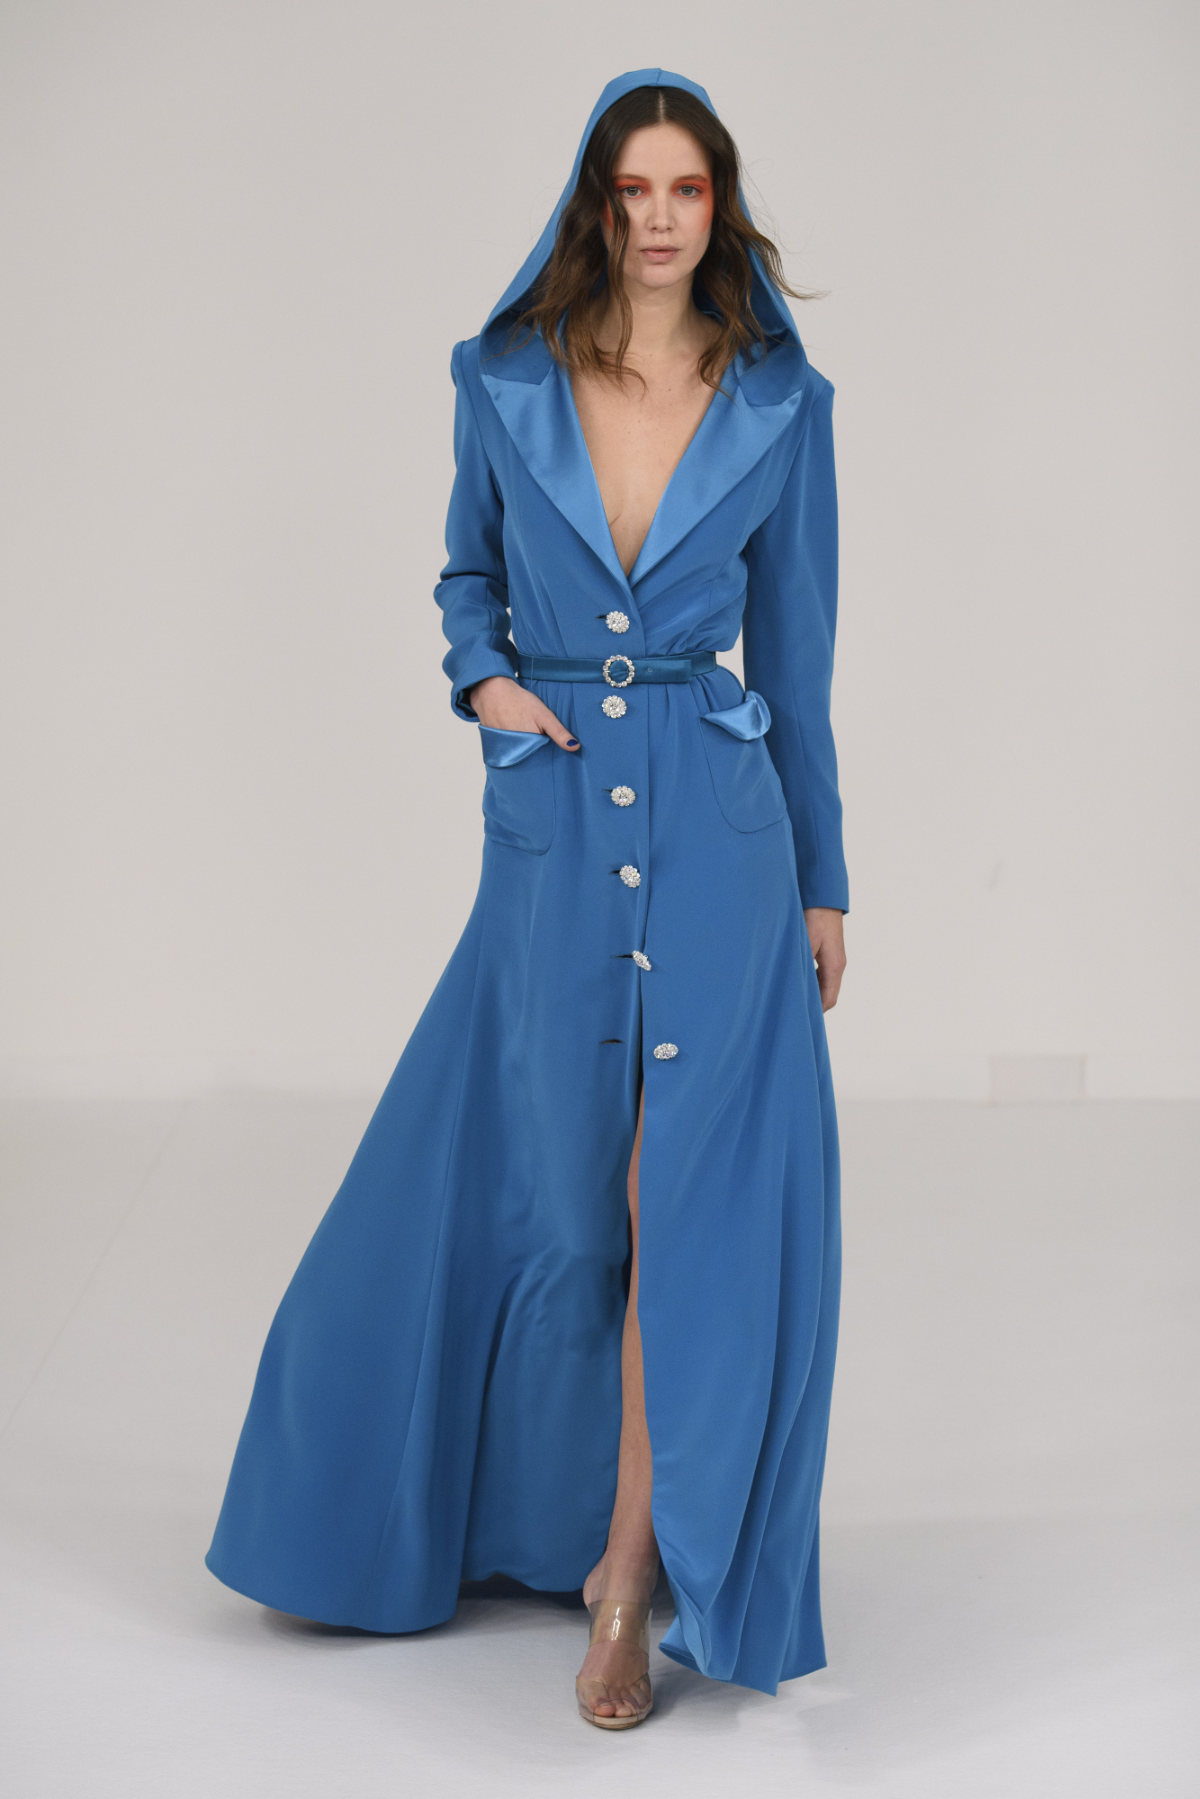 Alexis Mabille Presents His New Haute Couture Spring-Summer 2023 Collection: Color-addict